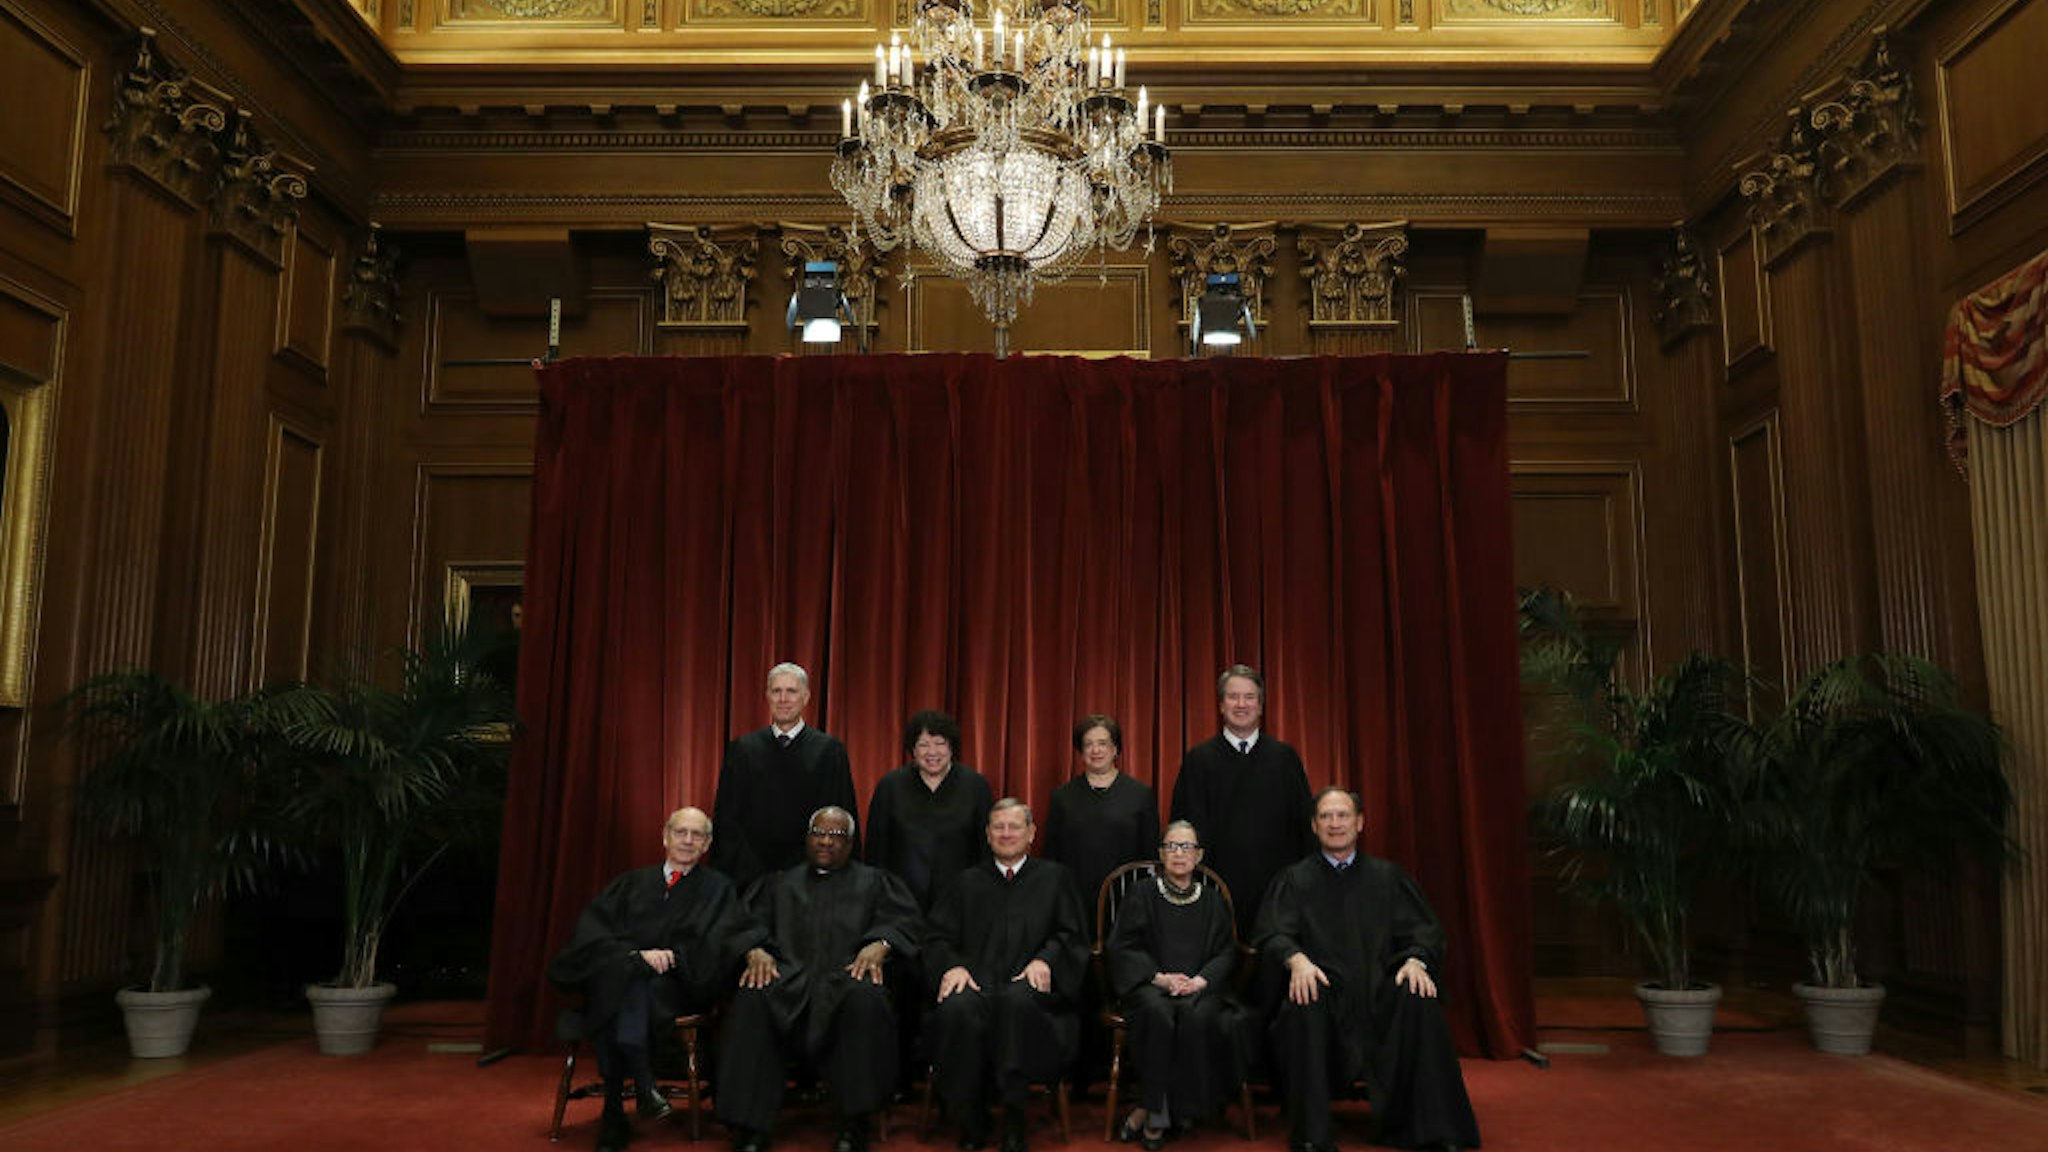 WASHINGTON, DC - NOVEMBER 30: United States Supreme Court (Front L-R) Associate Justice Stephen Breyer, Associate Justice Clarence Thomas, Chief Justice John Roberts, Associate Justice Ruth Bader Ginsburg, Associate Justice Samuel Alito, Jr., (Back L-R) Associate Justice Neil Gorsuch, Associate Justice Sonia Sotomayor, Associate Justice Elena Kagan and Associate Justice Brett Kavanaugh pose for their official portrait at the in the East Conference Room at the Supreme Court building November 30, 2018 in Washington, DC. Earlier this month, Chief Justice Roberts publicly defended the independence and integrity of the federal judiciary against President Trump after he called a judge who had ruled against his administration’s asylum policy “an Obama judge.” “We do not have Obama judges or Trump judges, Bush judges or Clinton judges,” Roberts said in a statement. “What we have is an extraordinary group of dedicated judges doing their level best to do equal right to those appearing before them. That independent judiciary is something we should all be thankful for.” (Photo by Chip Somodevilla/Getty Images)